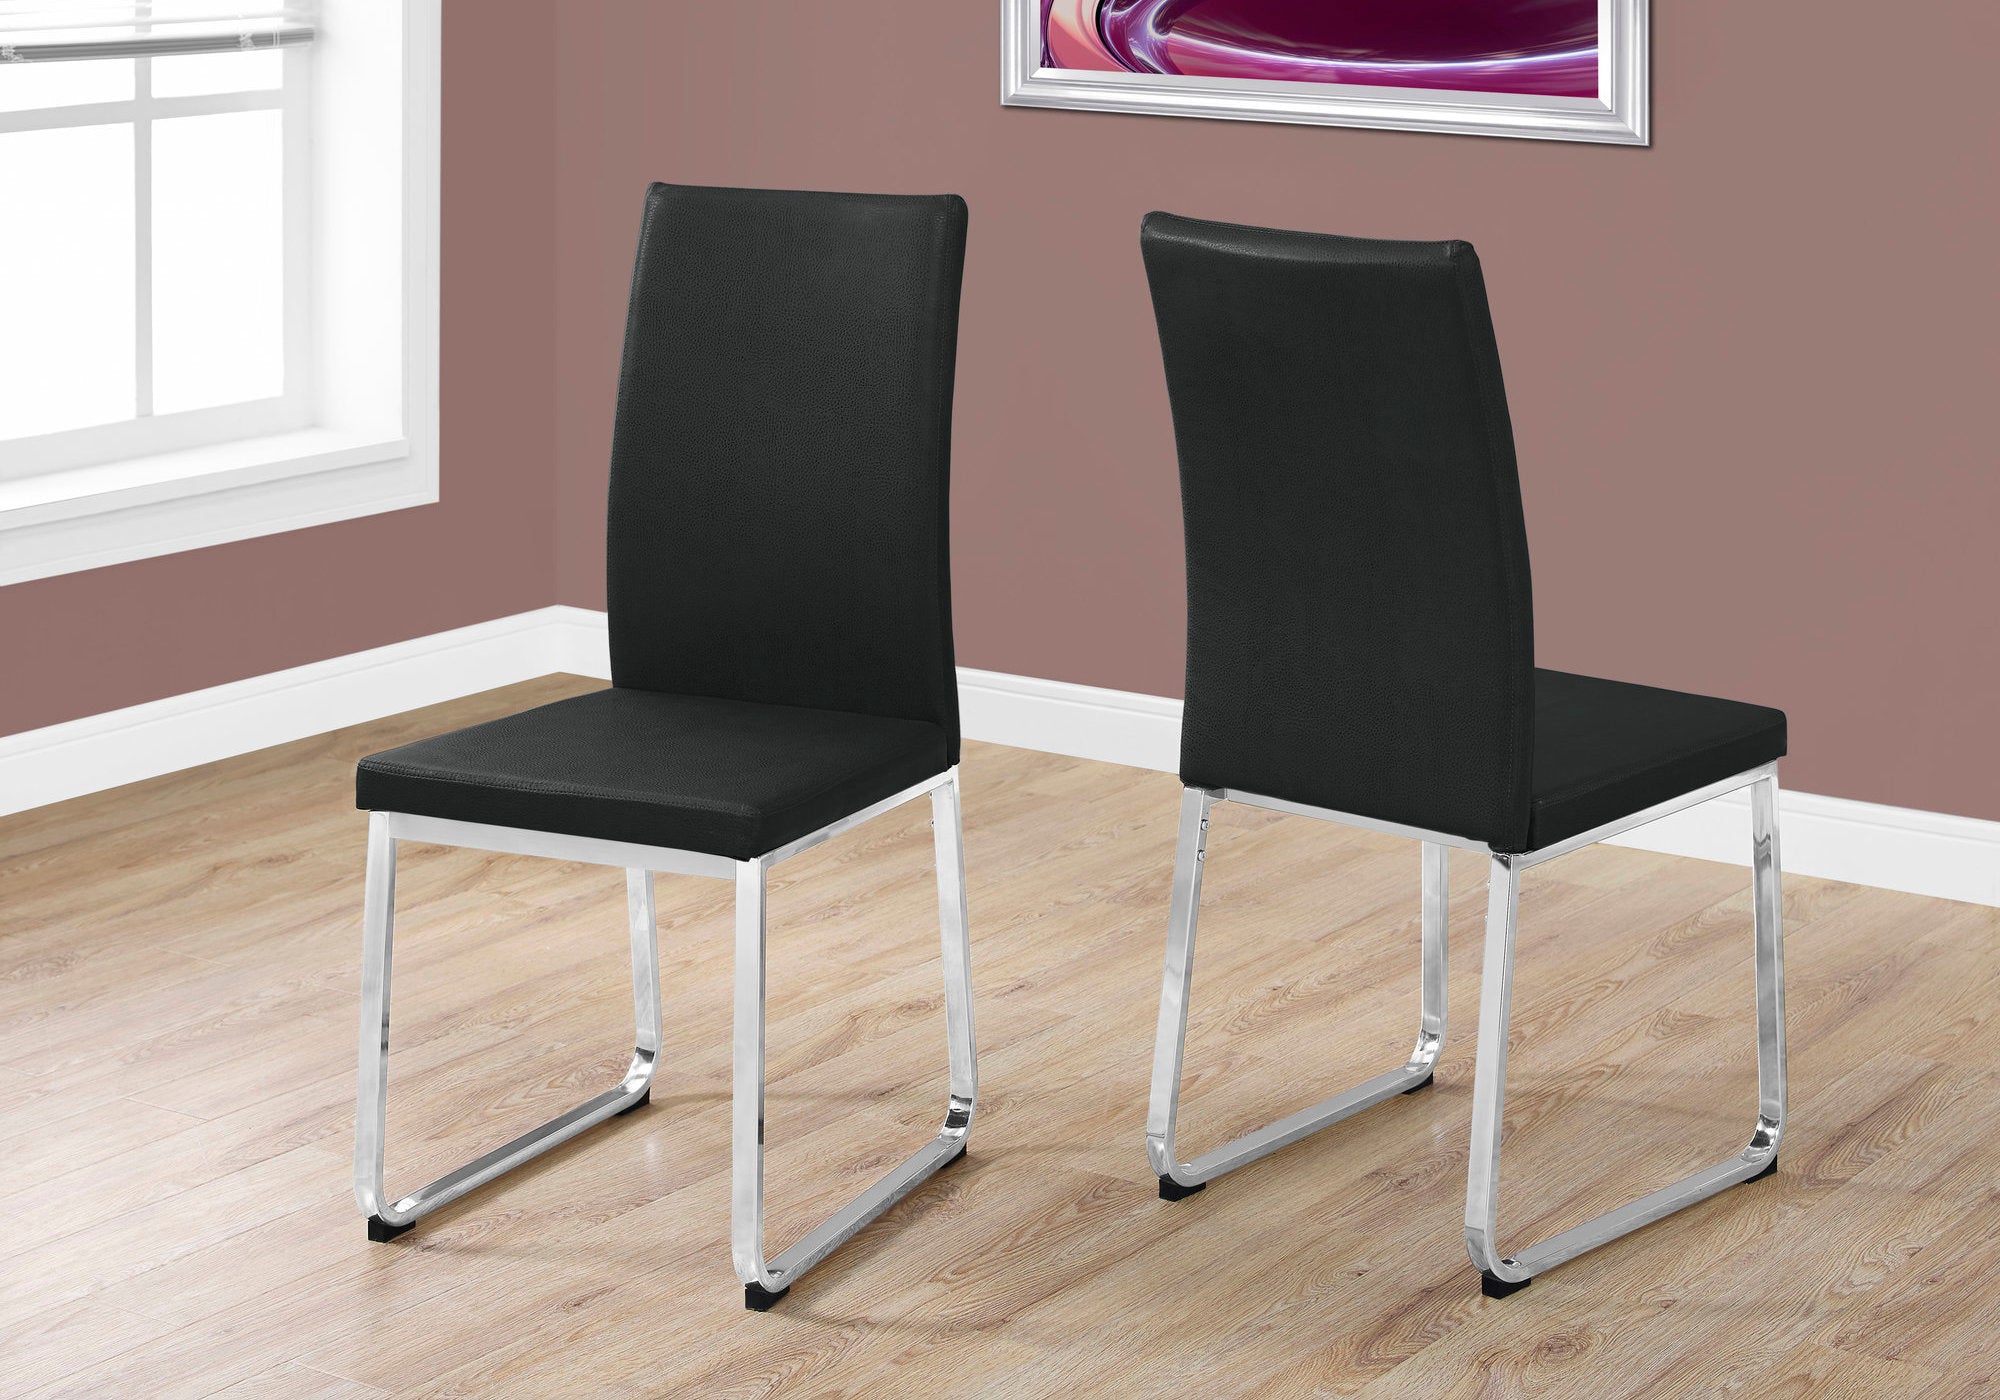 Mclenagan Modern Dining Chair With Chrome Finish Legs (Set of 2 - Black)